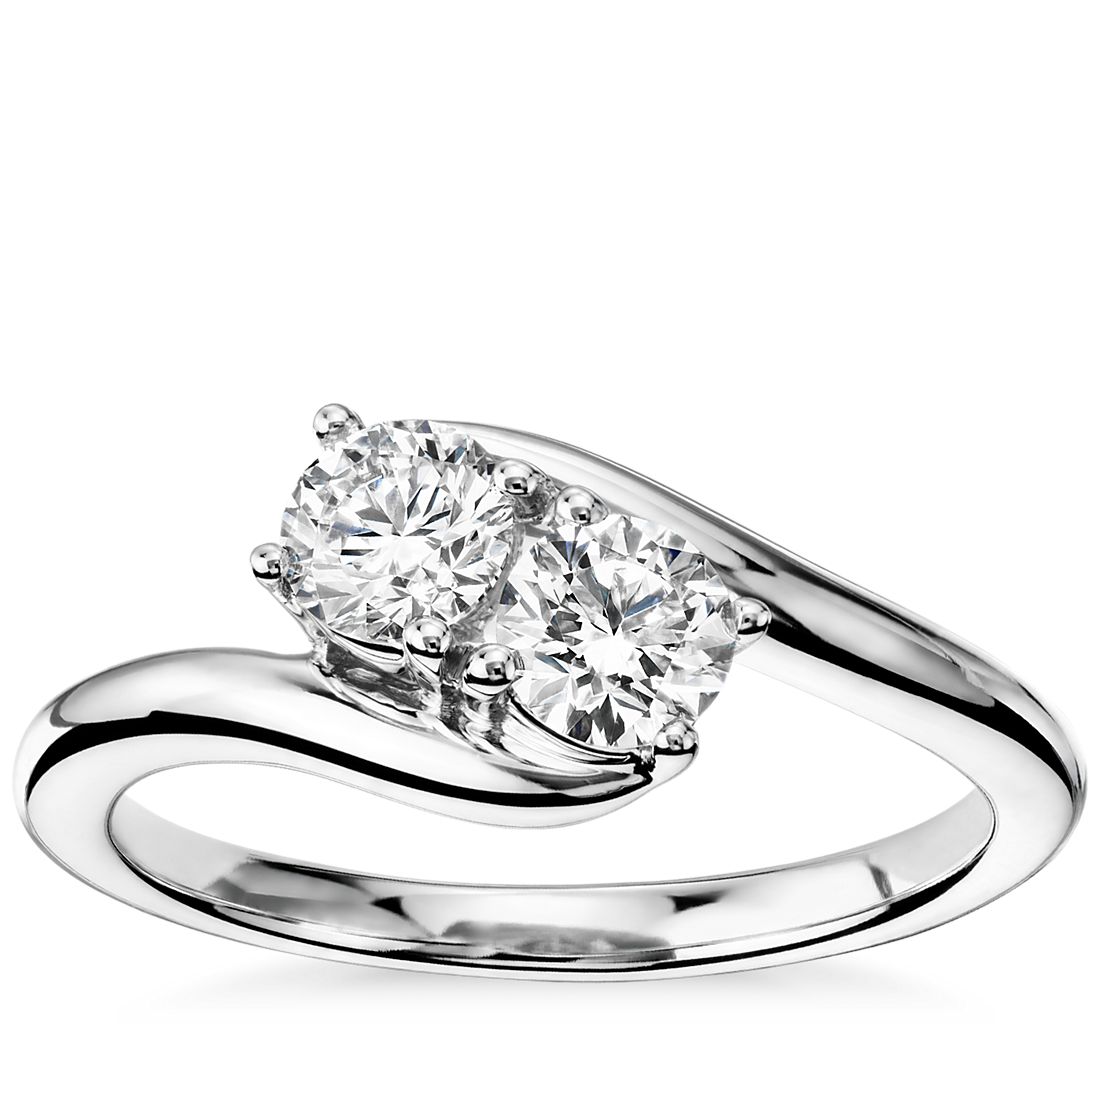 Two-Stone Solitaire Diamond Ring in 14k White Gold (3/4 ct. tw.)